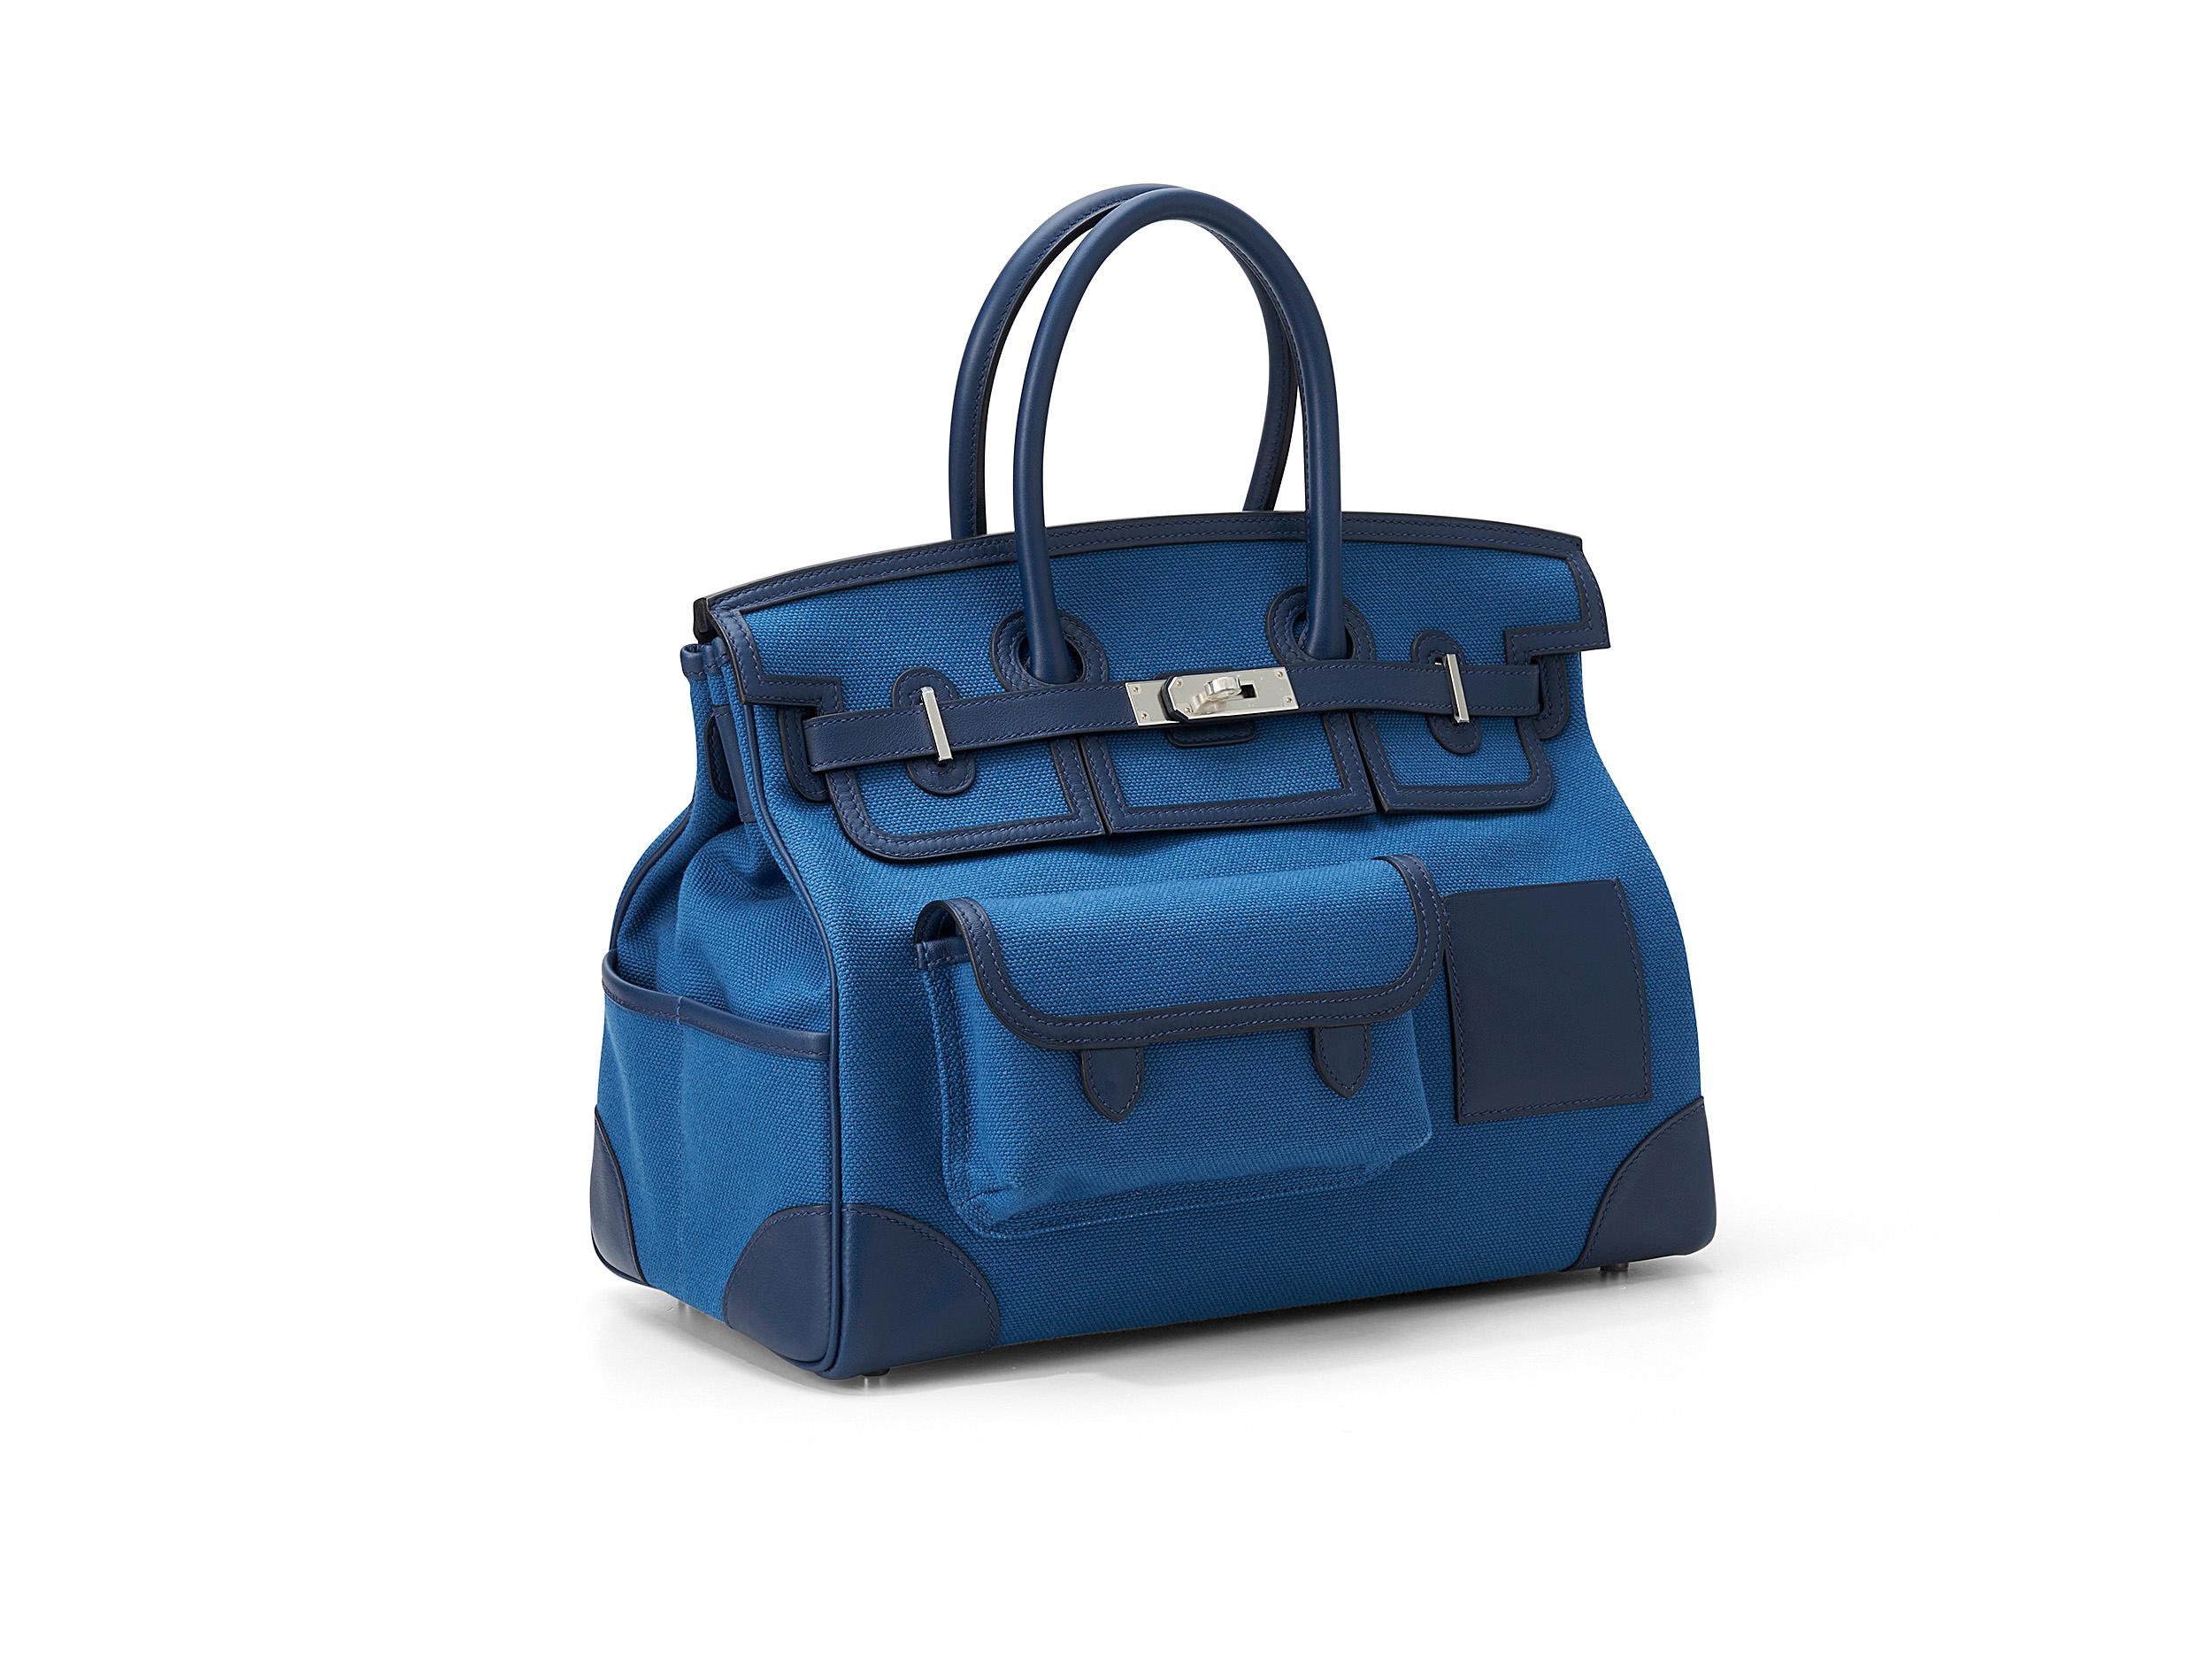 Hermès Birkin Cargo 35 in bleu marine and canvas swift leather with palladium hardware. The bag is unworn and comes as full set. 

Stamp Y (2020) 

